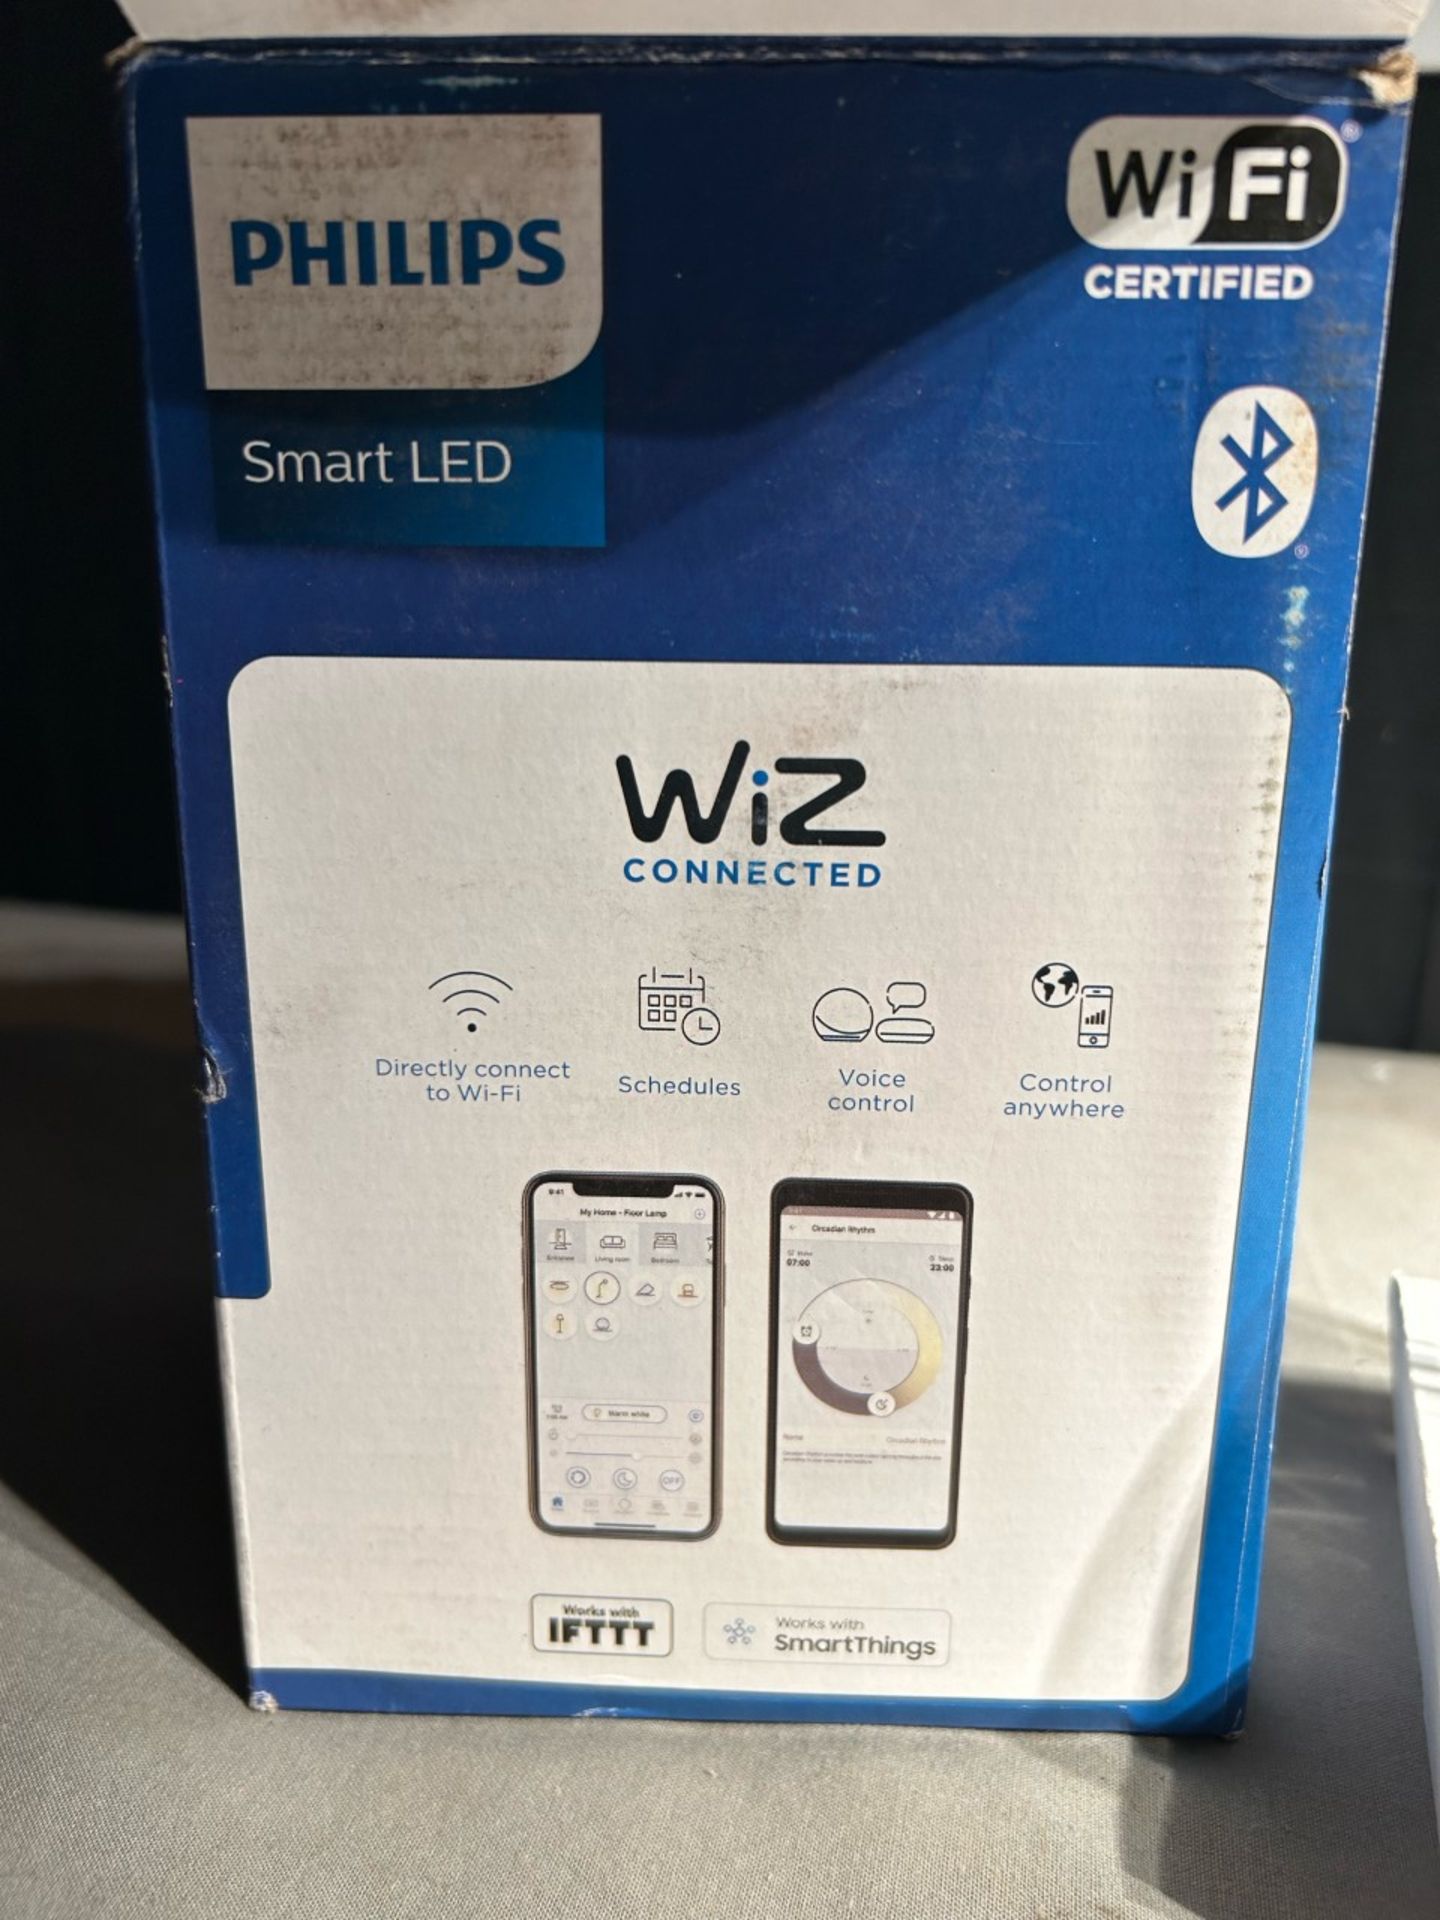 Philips smart LED bulb. Wiz connected lightbulb. Connects to wifi and controlled by app plus voice - Image 3 of 3